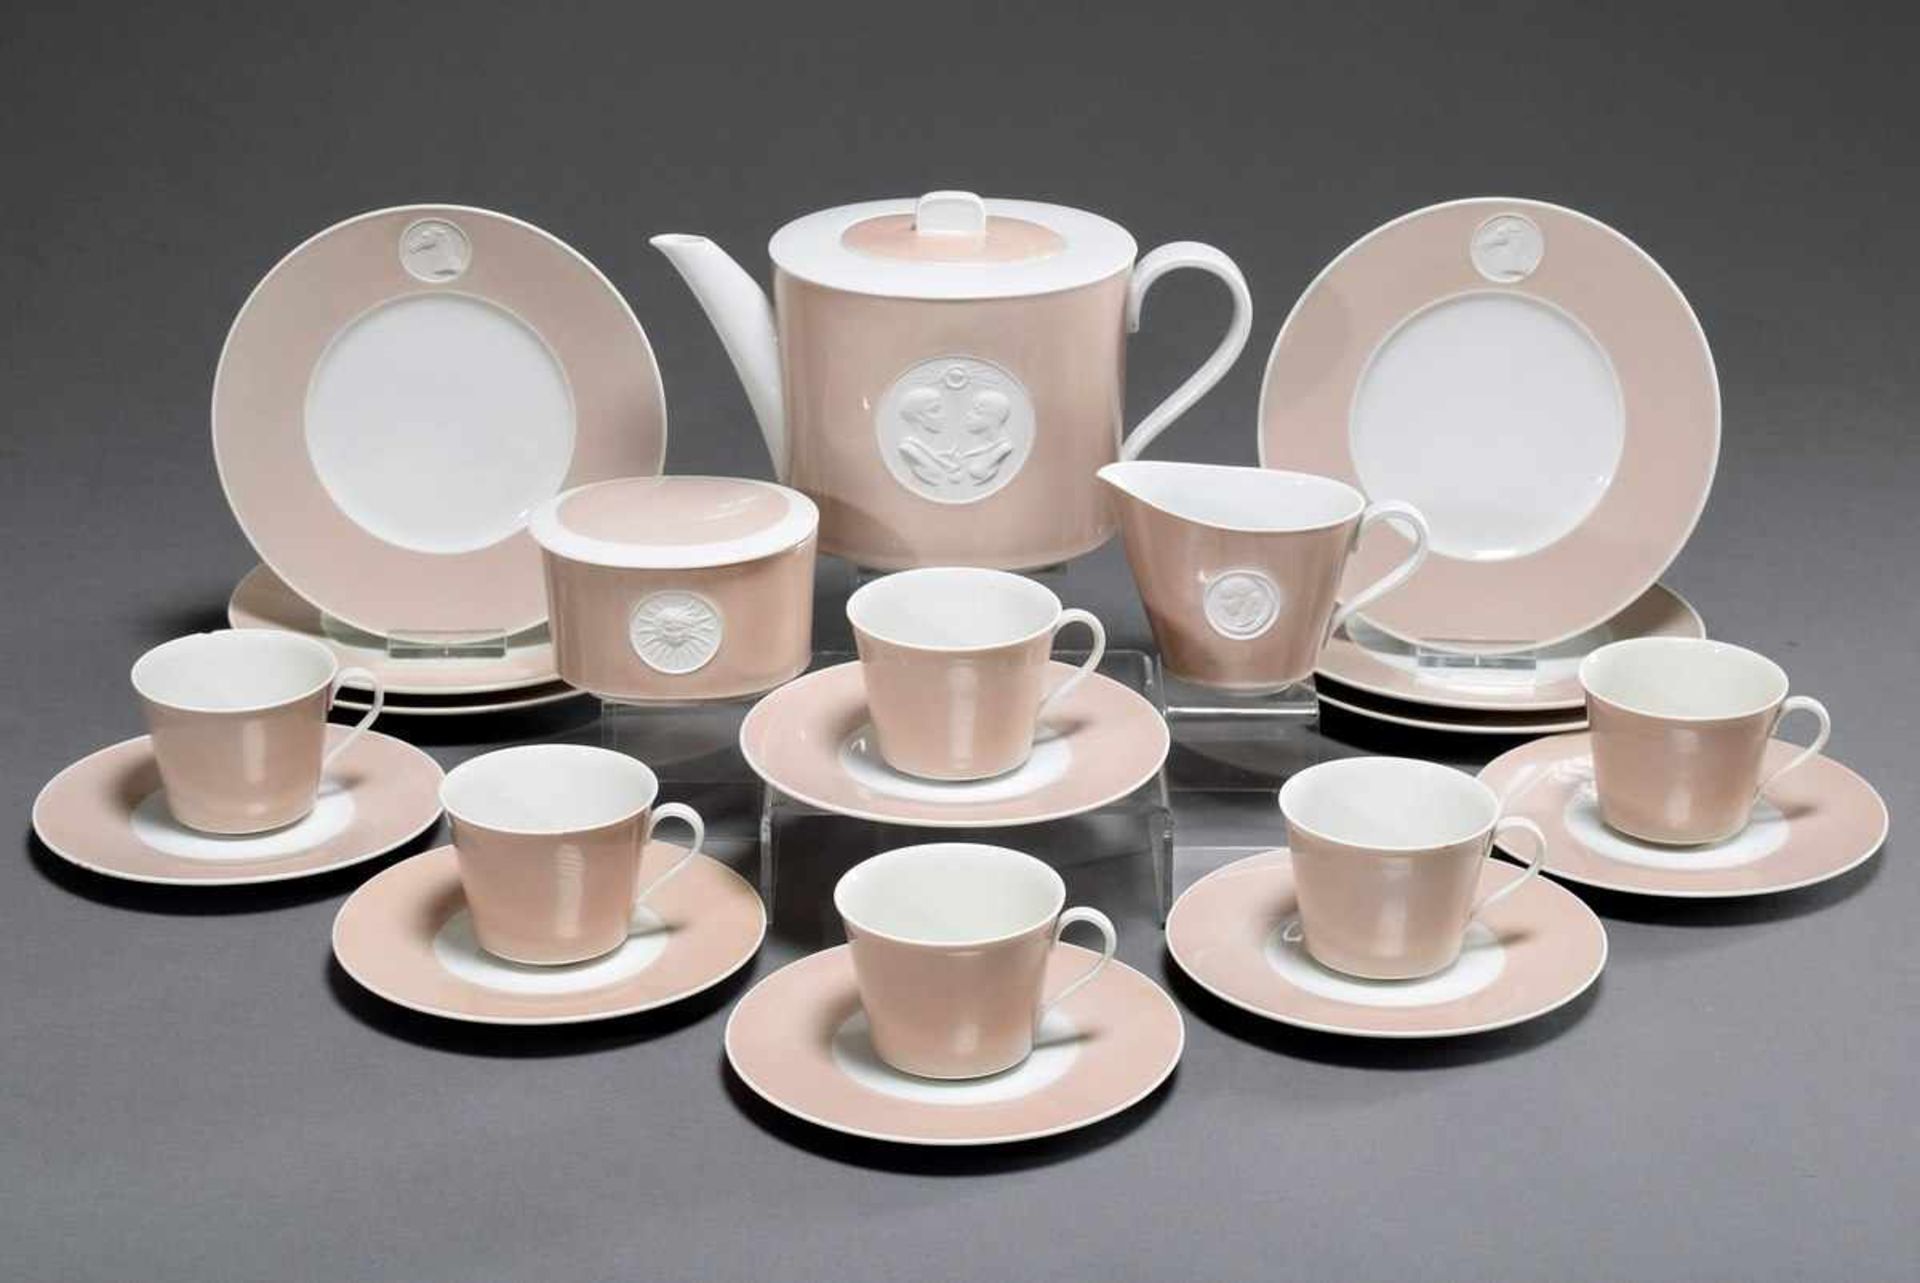 15 pieces KPM "Arcadia" mocha service for 6 persons with figural biscuit medallions on pastel